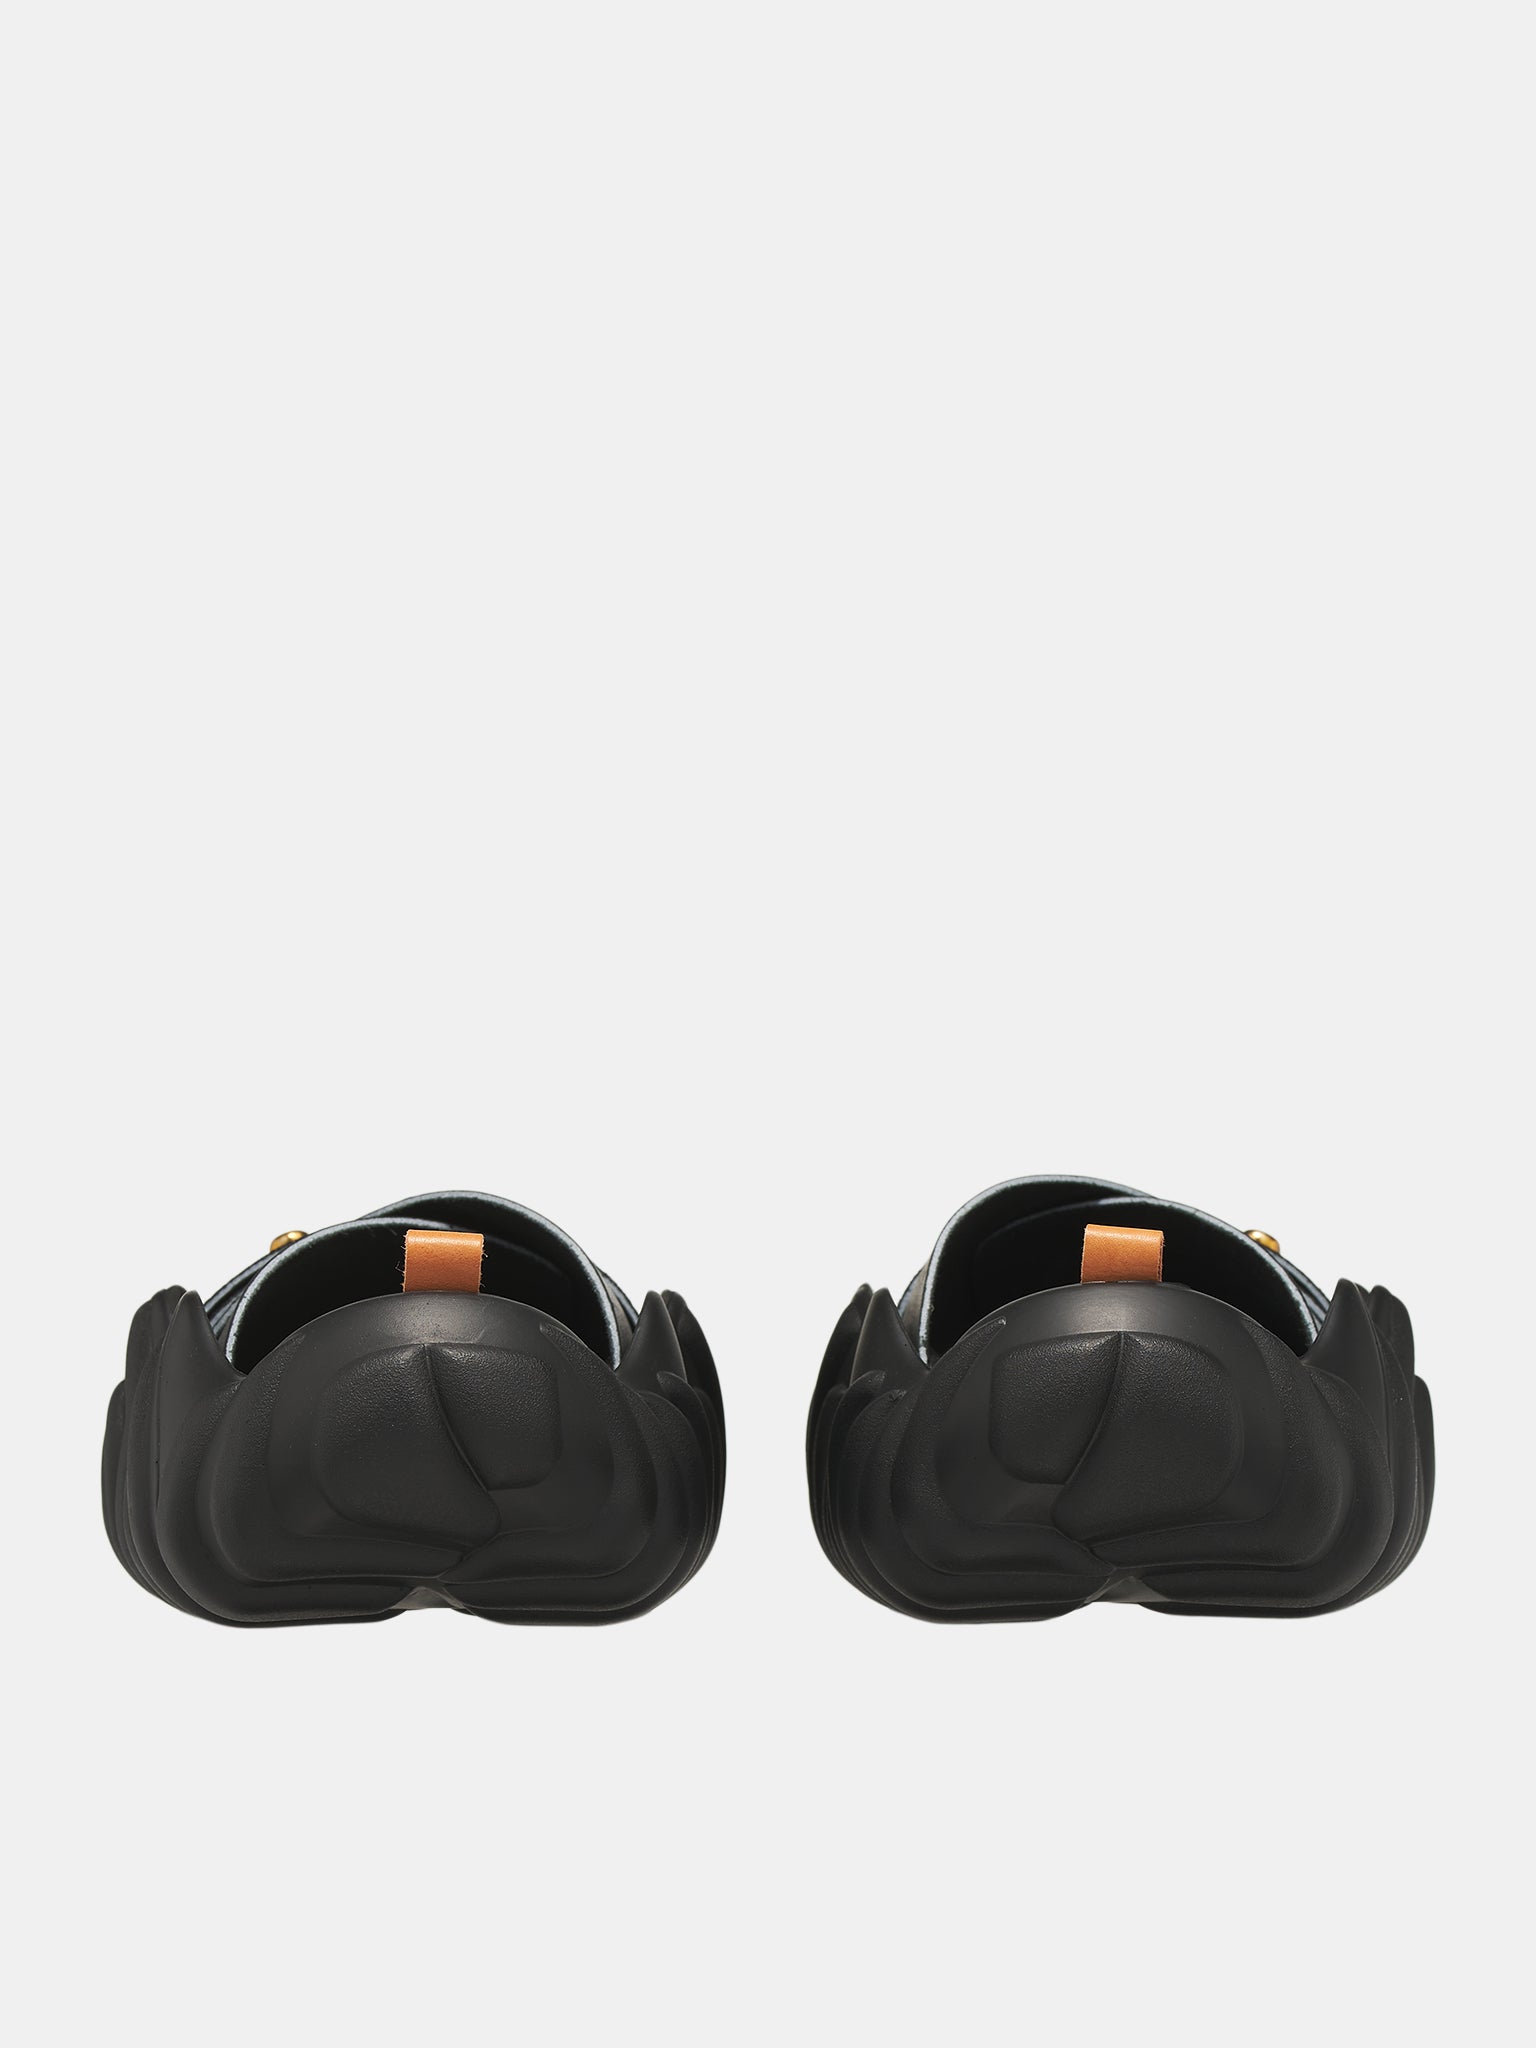 Molded Sole Leather Sandals (NEO-SO-BLACK)